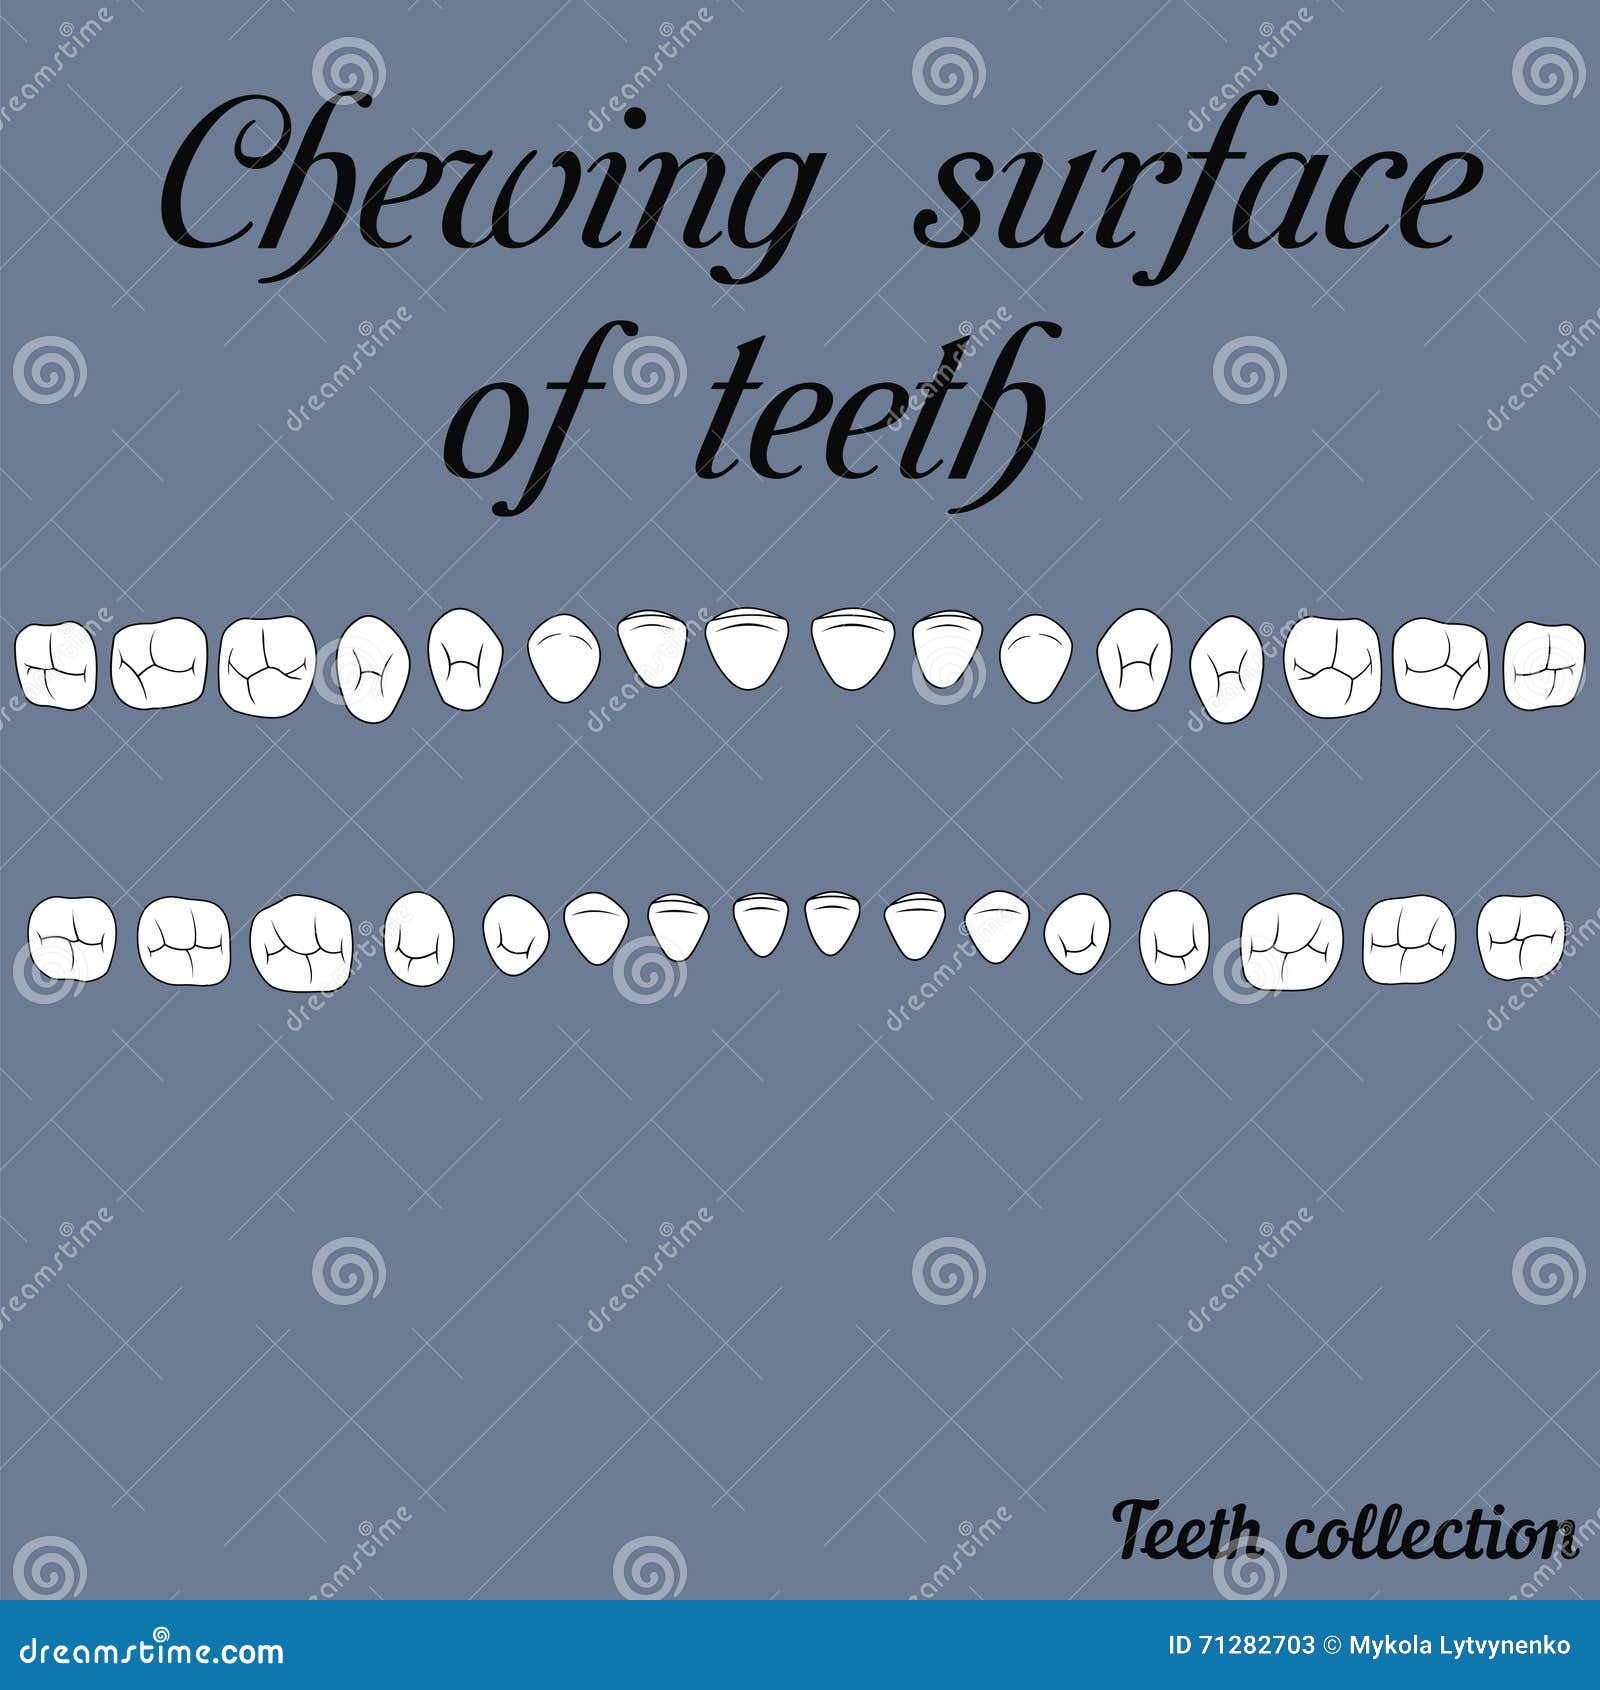 chewing surface of teeth